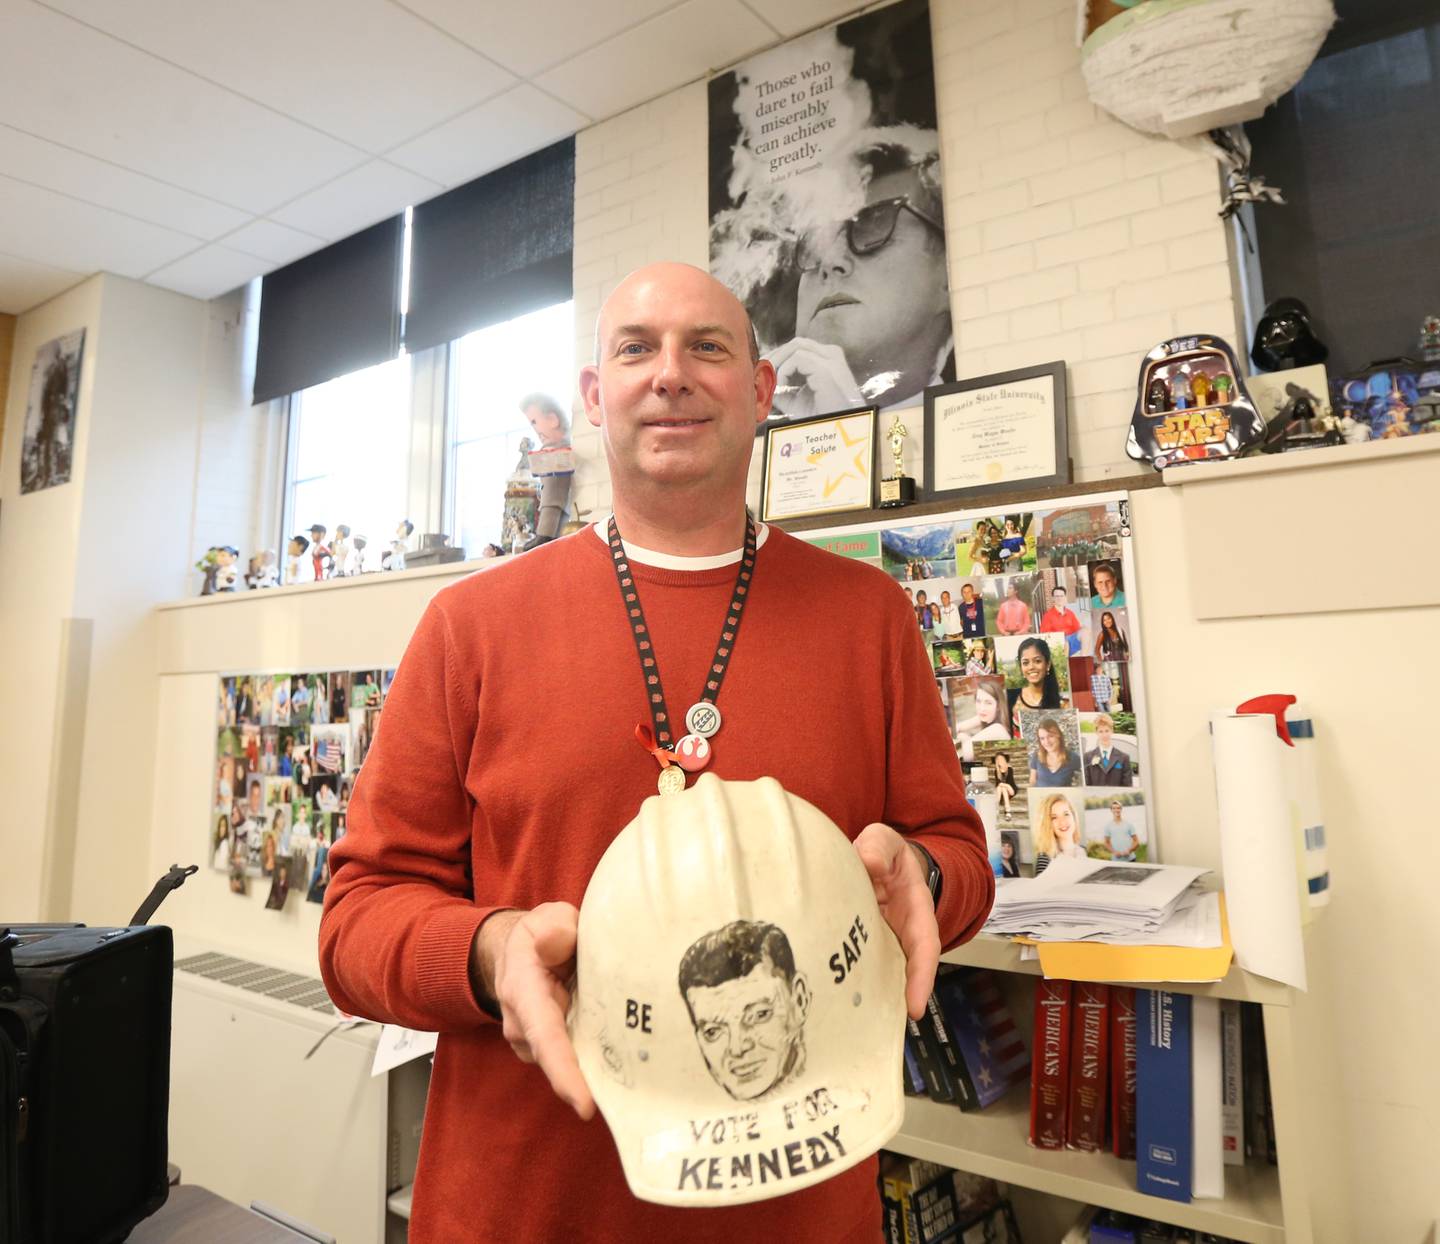 Mr. Troy Woods, history instructor at La-Salle-Peru Township High School, holds a campaign helmet that reads "Be safe Vote for Kennedy" printed on it in his classroom on Wednesday, Dec. 7, 2022 at L-P High School. Woods obtained the helmet from the Suarez family. John Suarez Sr. painted the helmet and was passed down to his son John who gave it to Troy. Woods is donating it to the JFK Presidential Museum and Archives in Boston Mass.